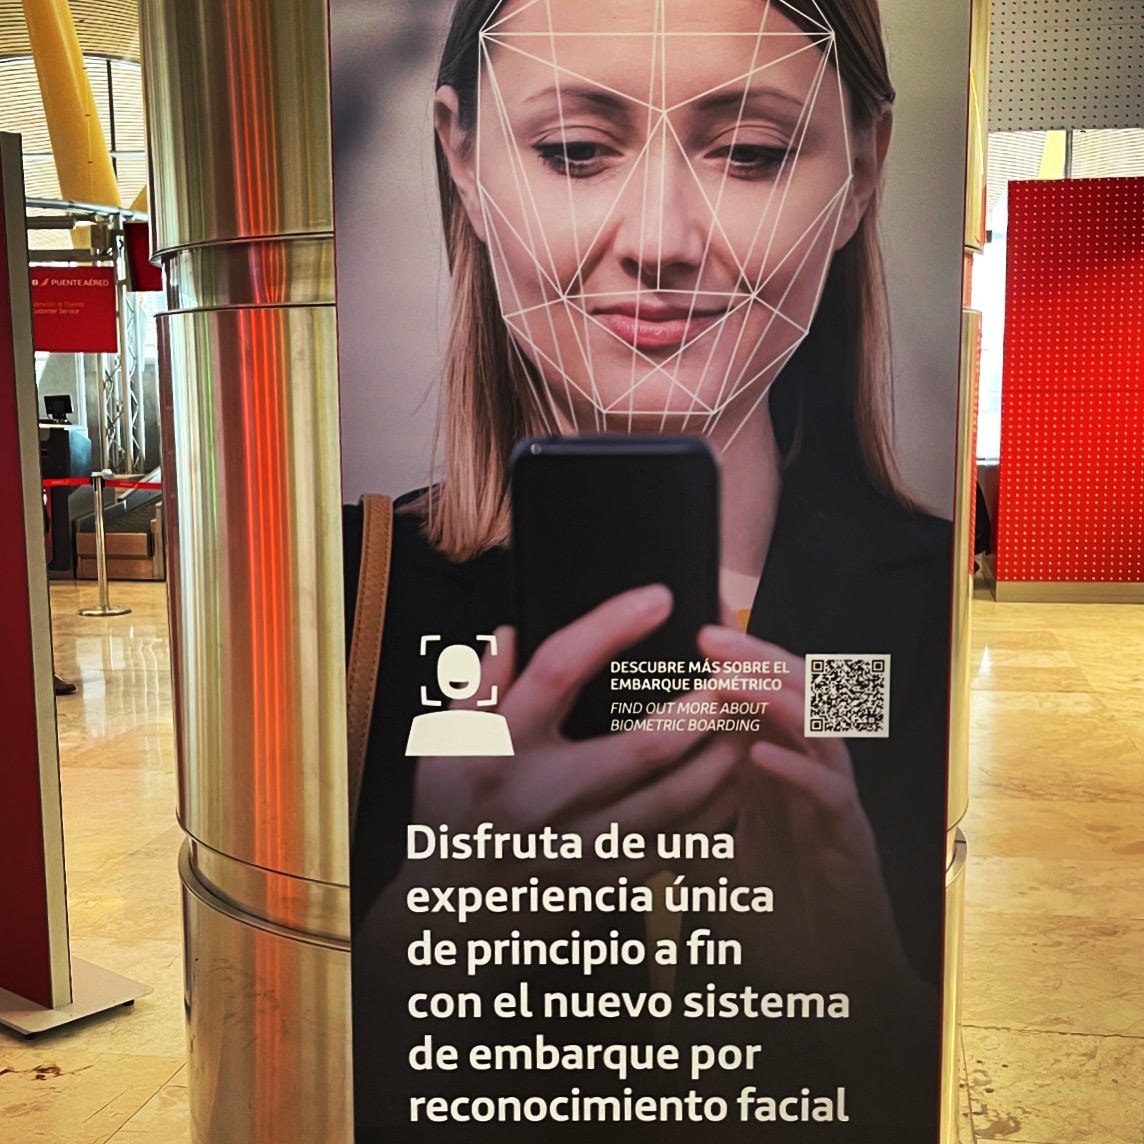 Spanish carrier Iberia trials facial recognition system